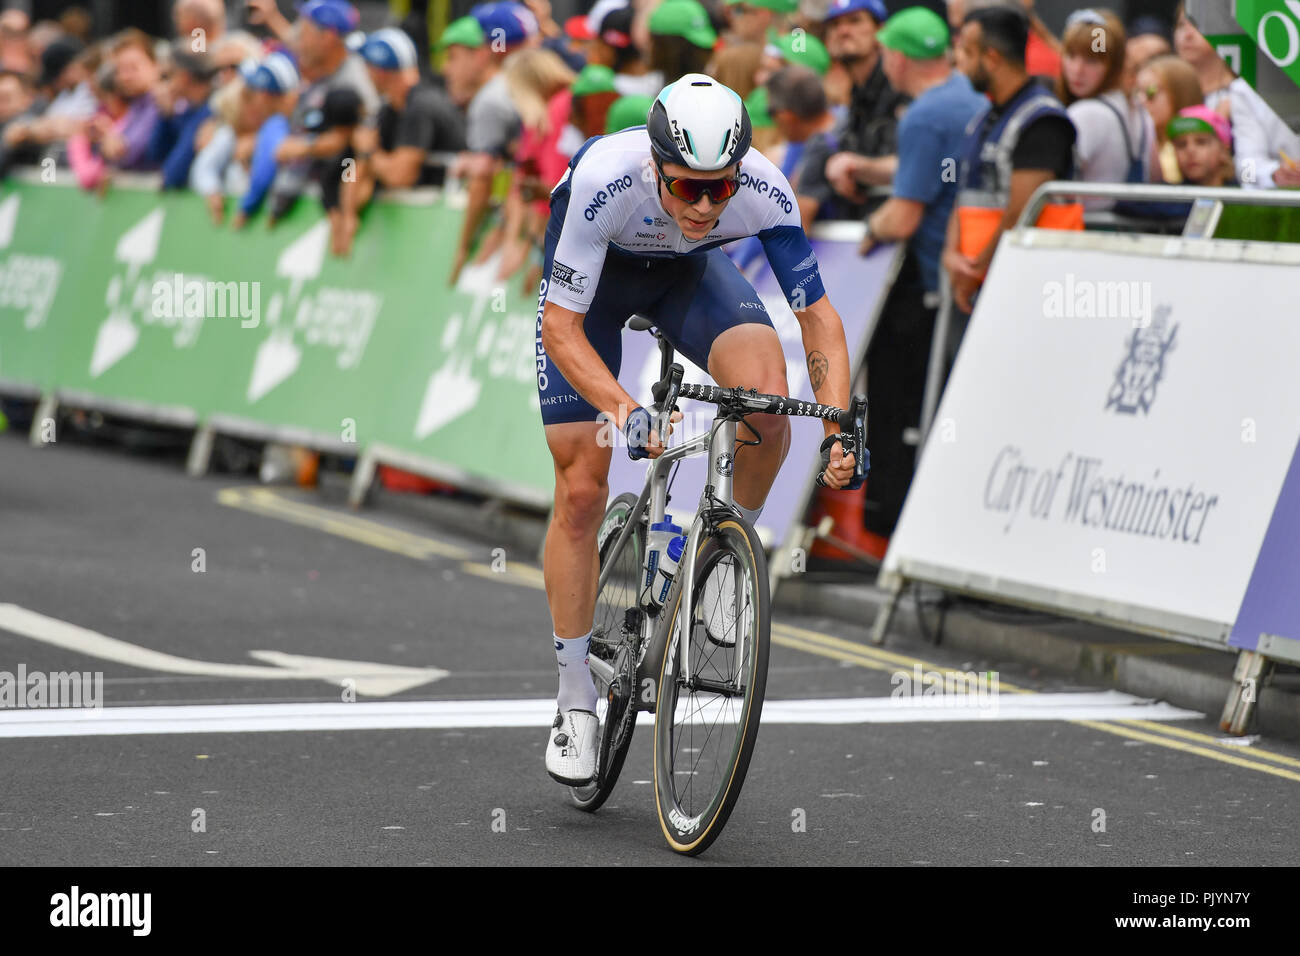 London, UK. 9th Sept 2018. Thomas Baylis of One Pro Cycling in today's action during 2018 OVO Energy Tour of Britain - Stage Eight: The London Stage on Sunday, September 09, 2018, LONDON ENGLAND: Credit: Taka Wu/Alamy Live News Stock Photo